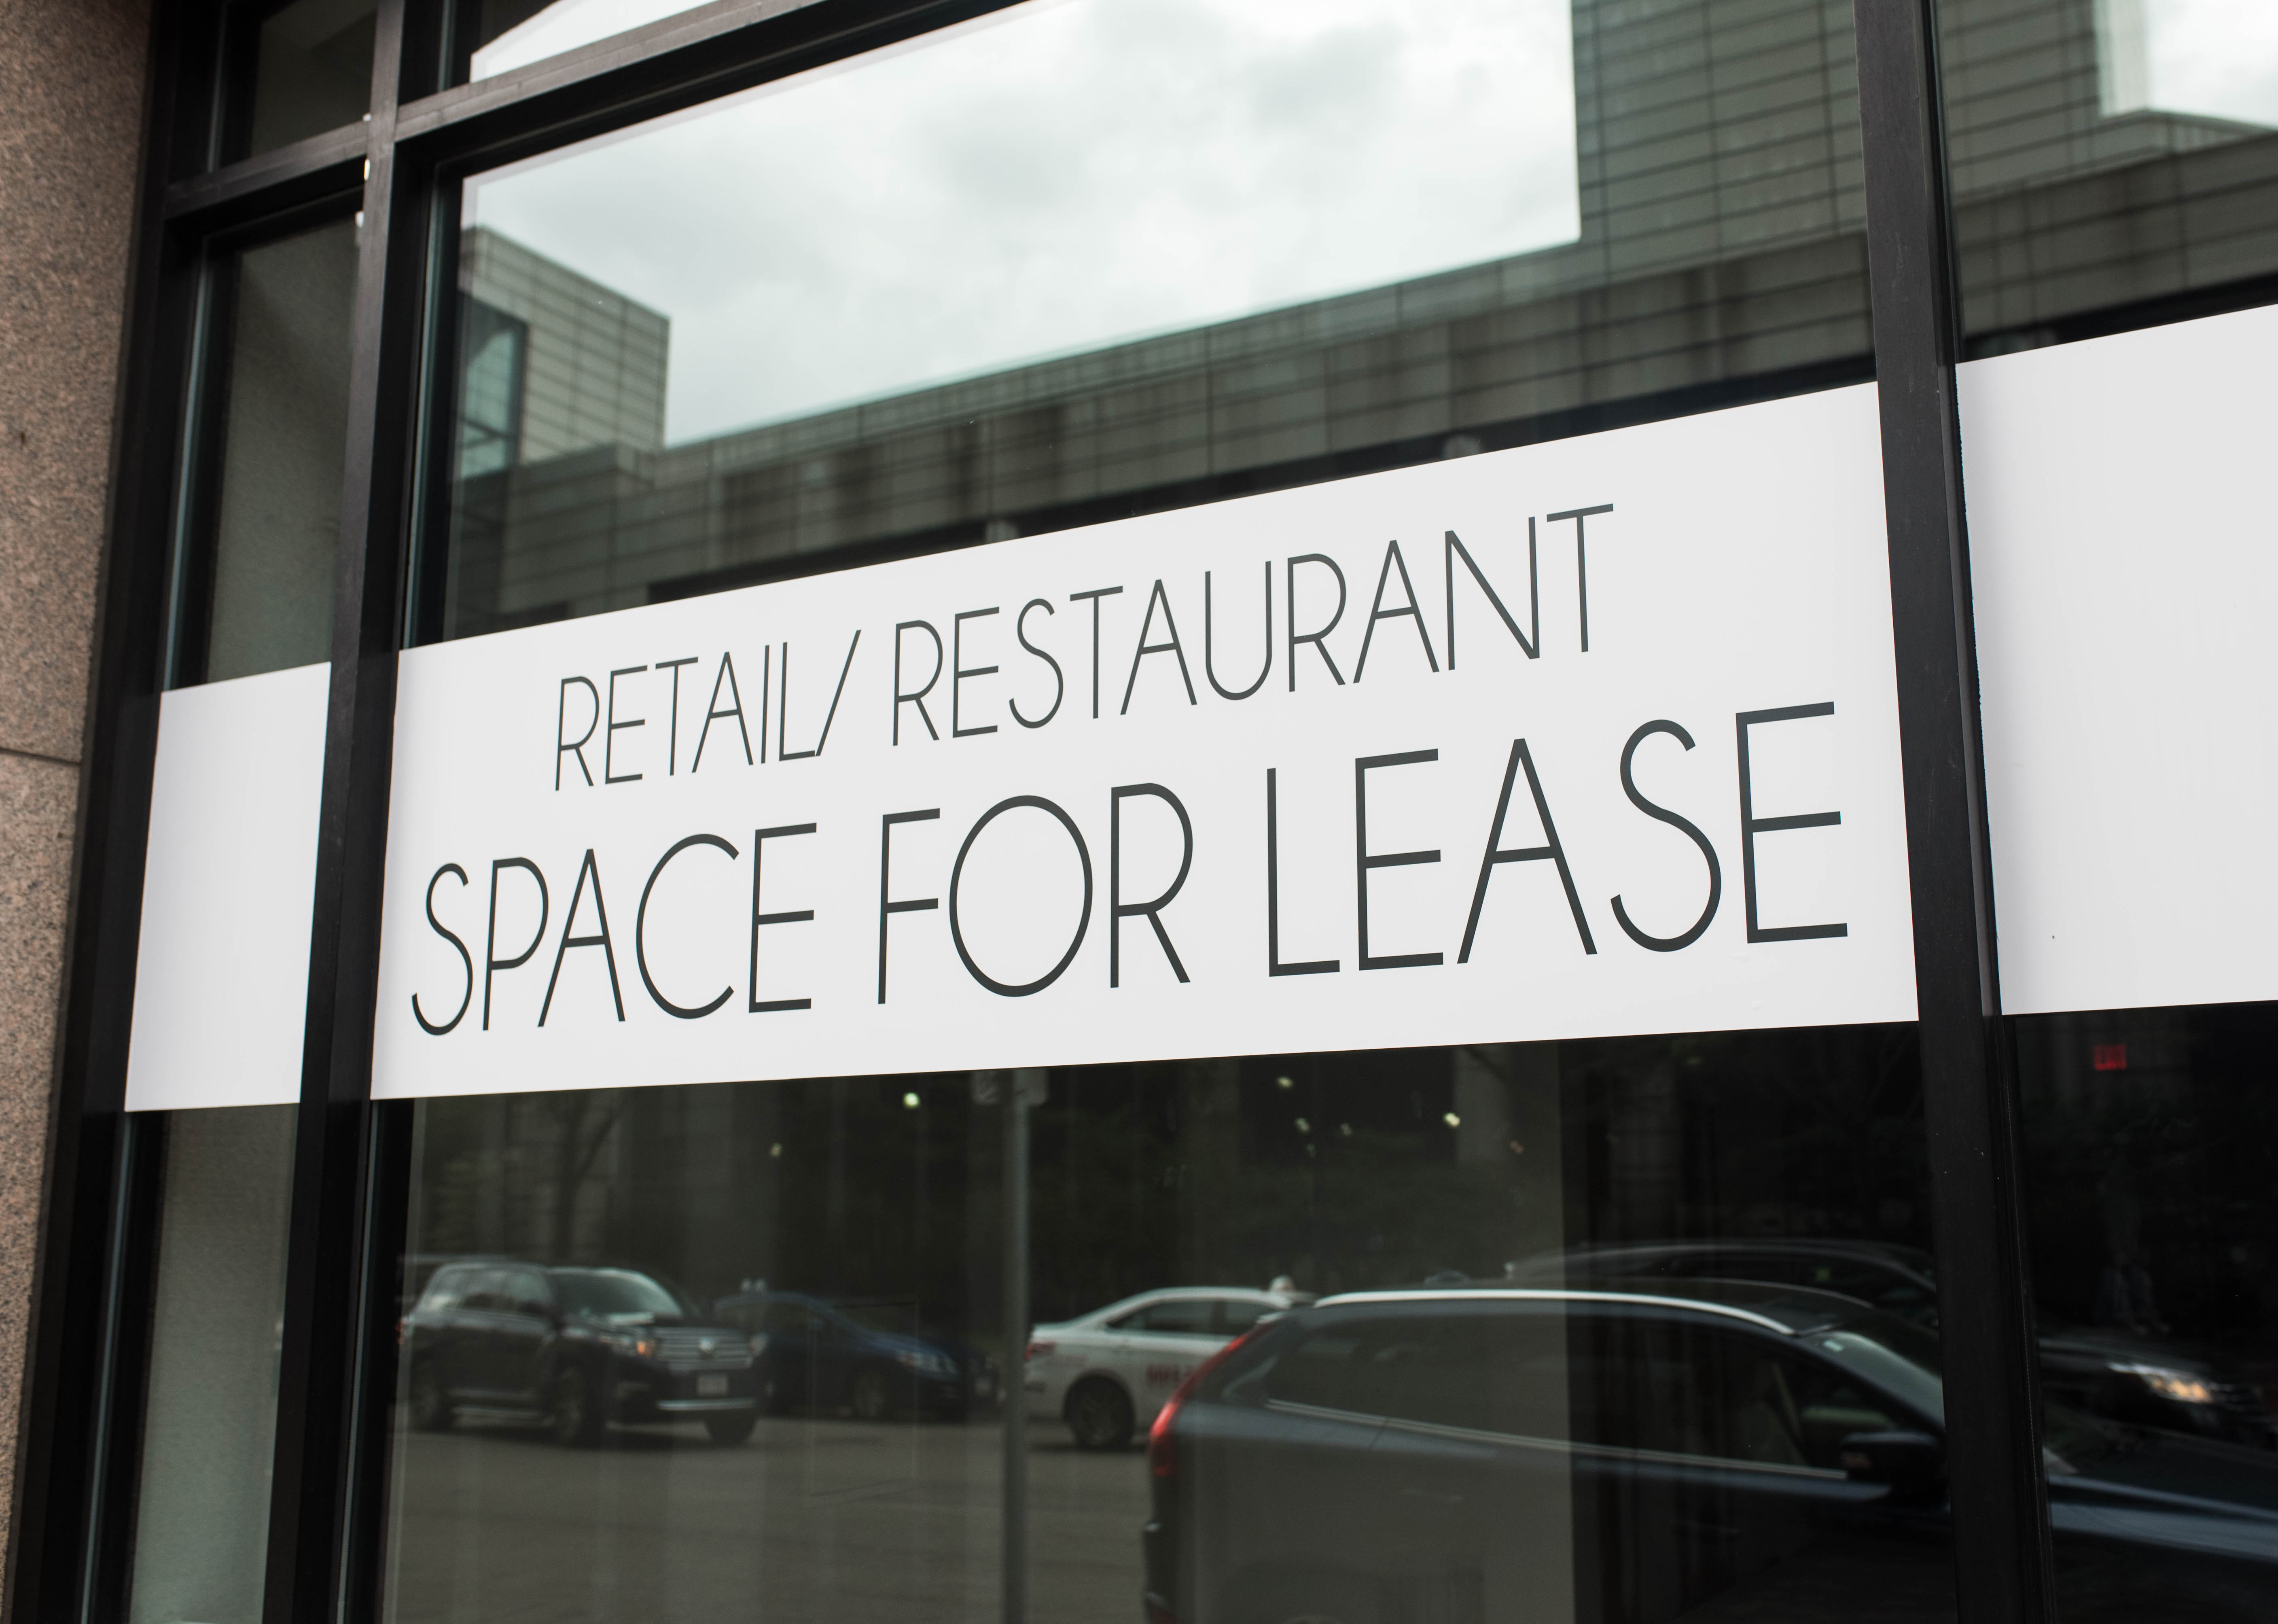 Retail/restaurant space for lease sign